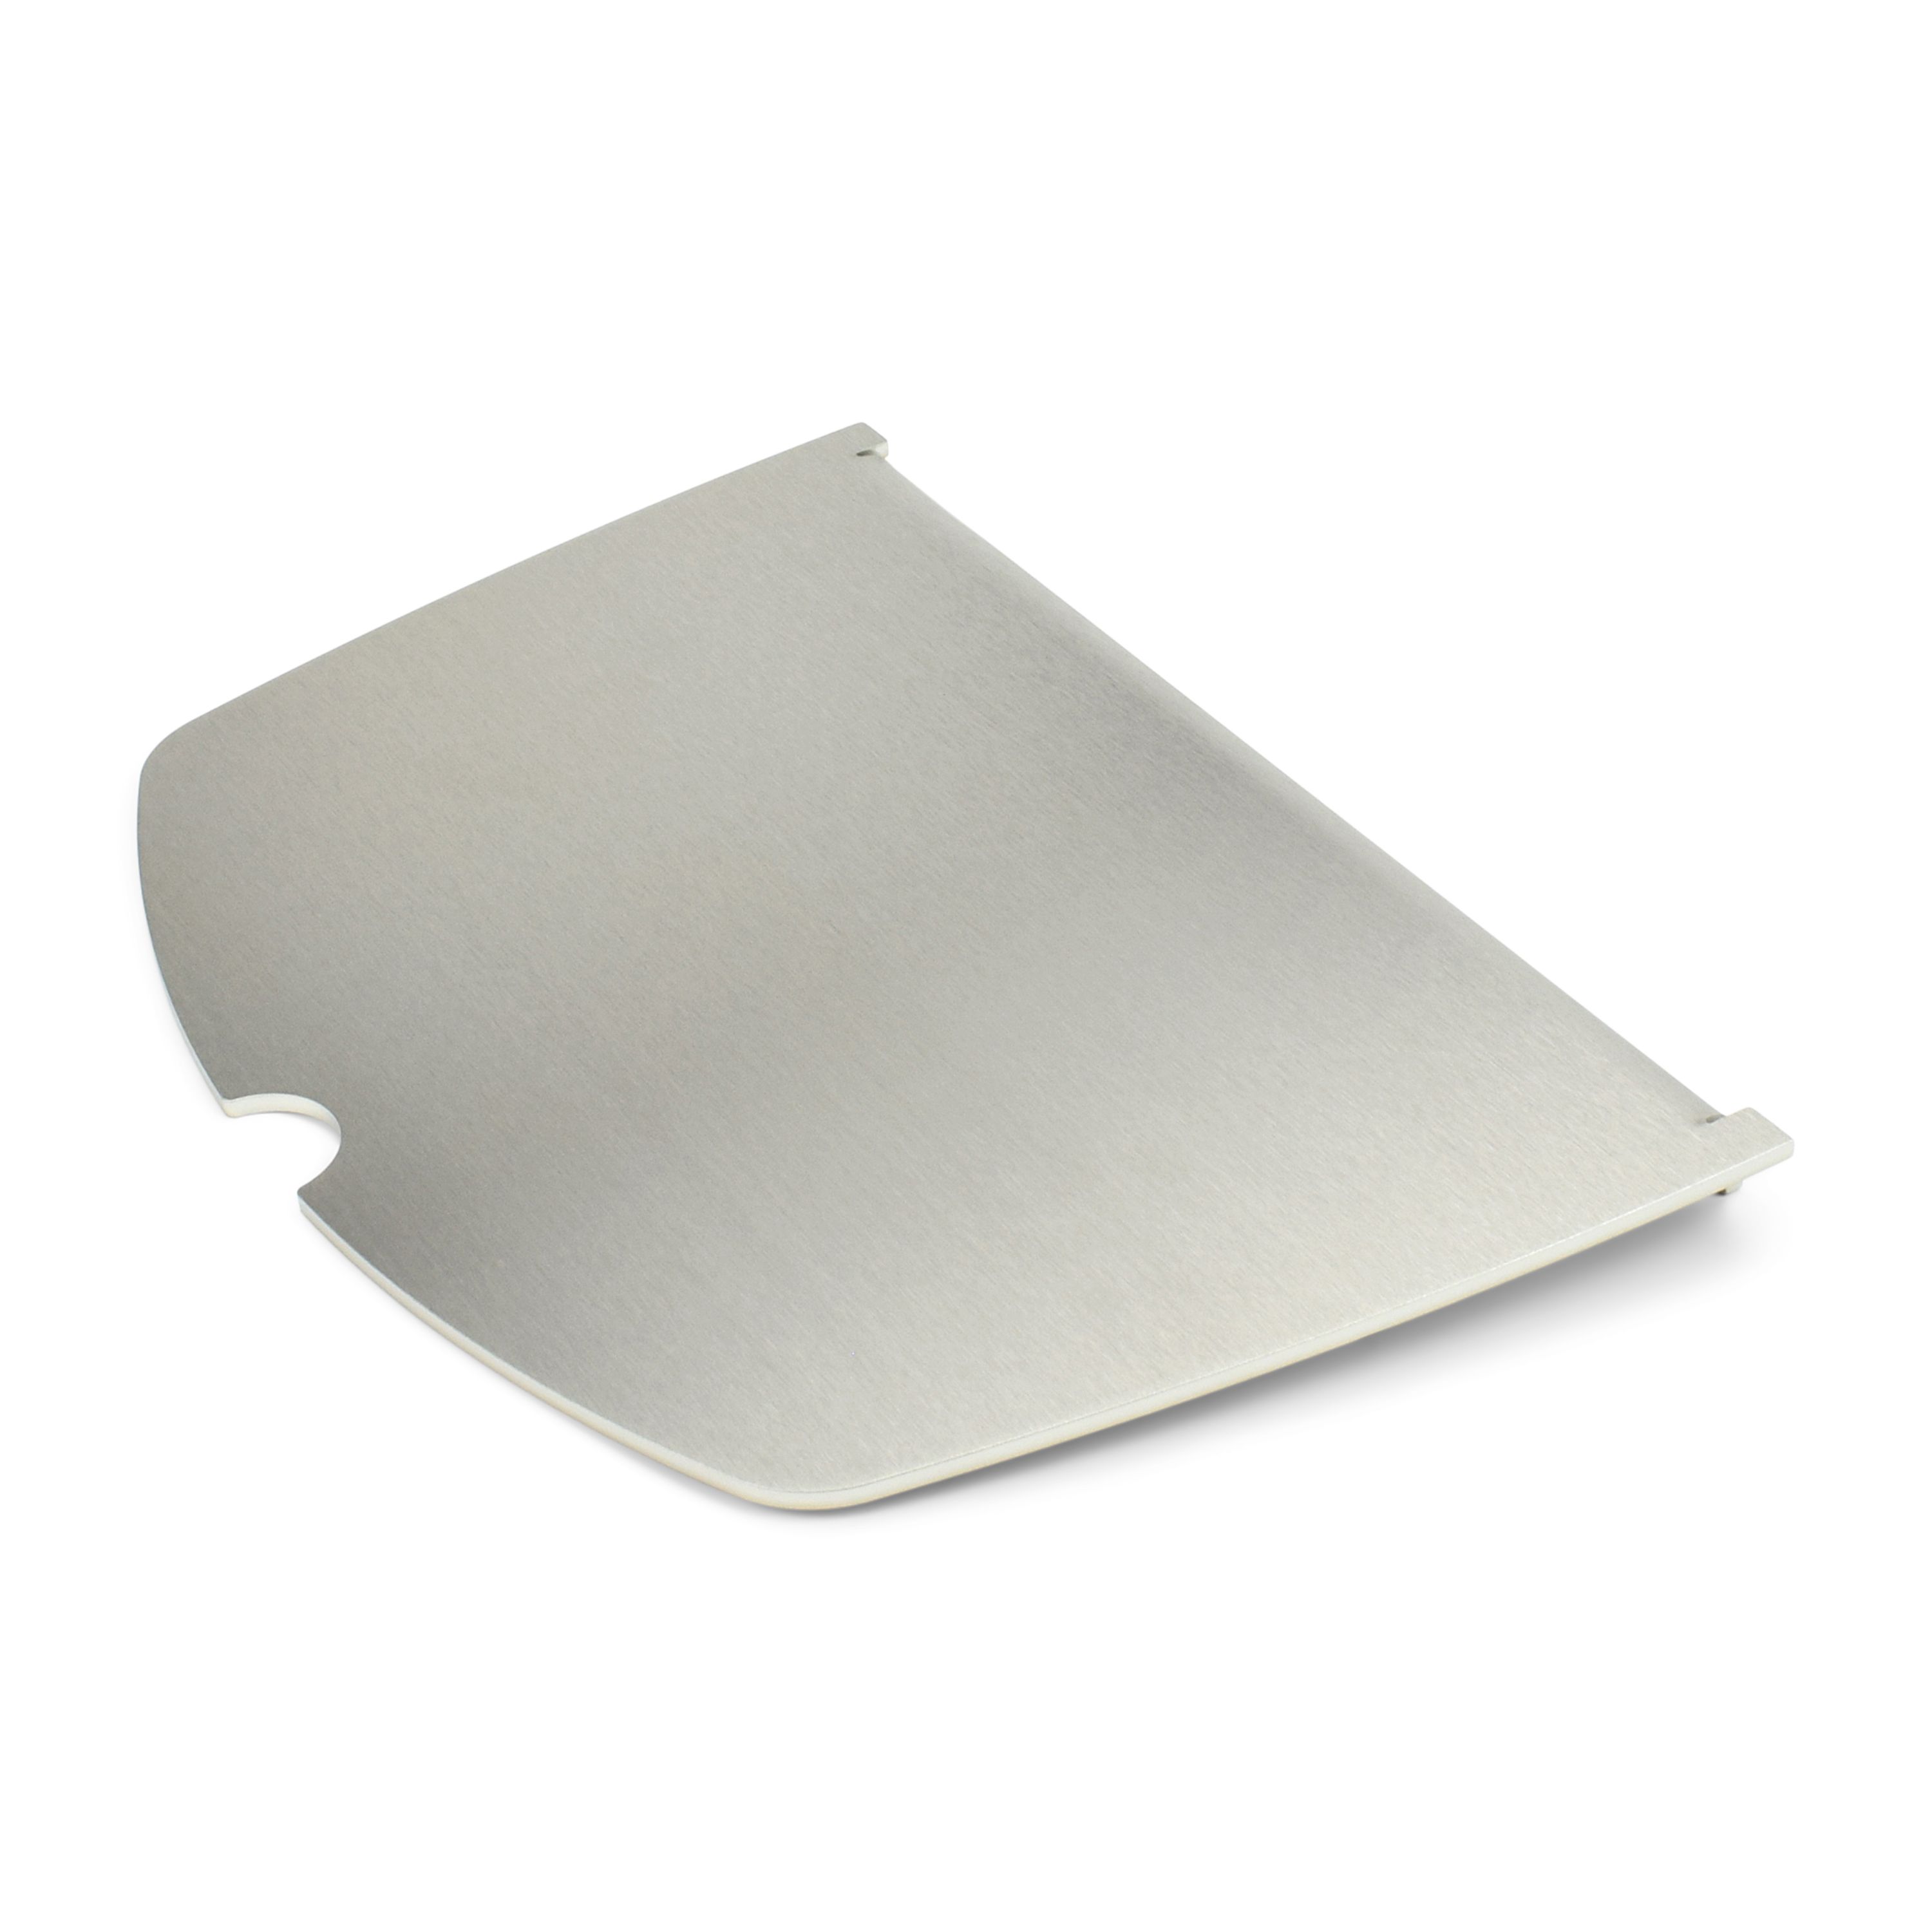 Stainless Steel Plancha for Weber Grill plate Q100 and Q1000 models